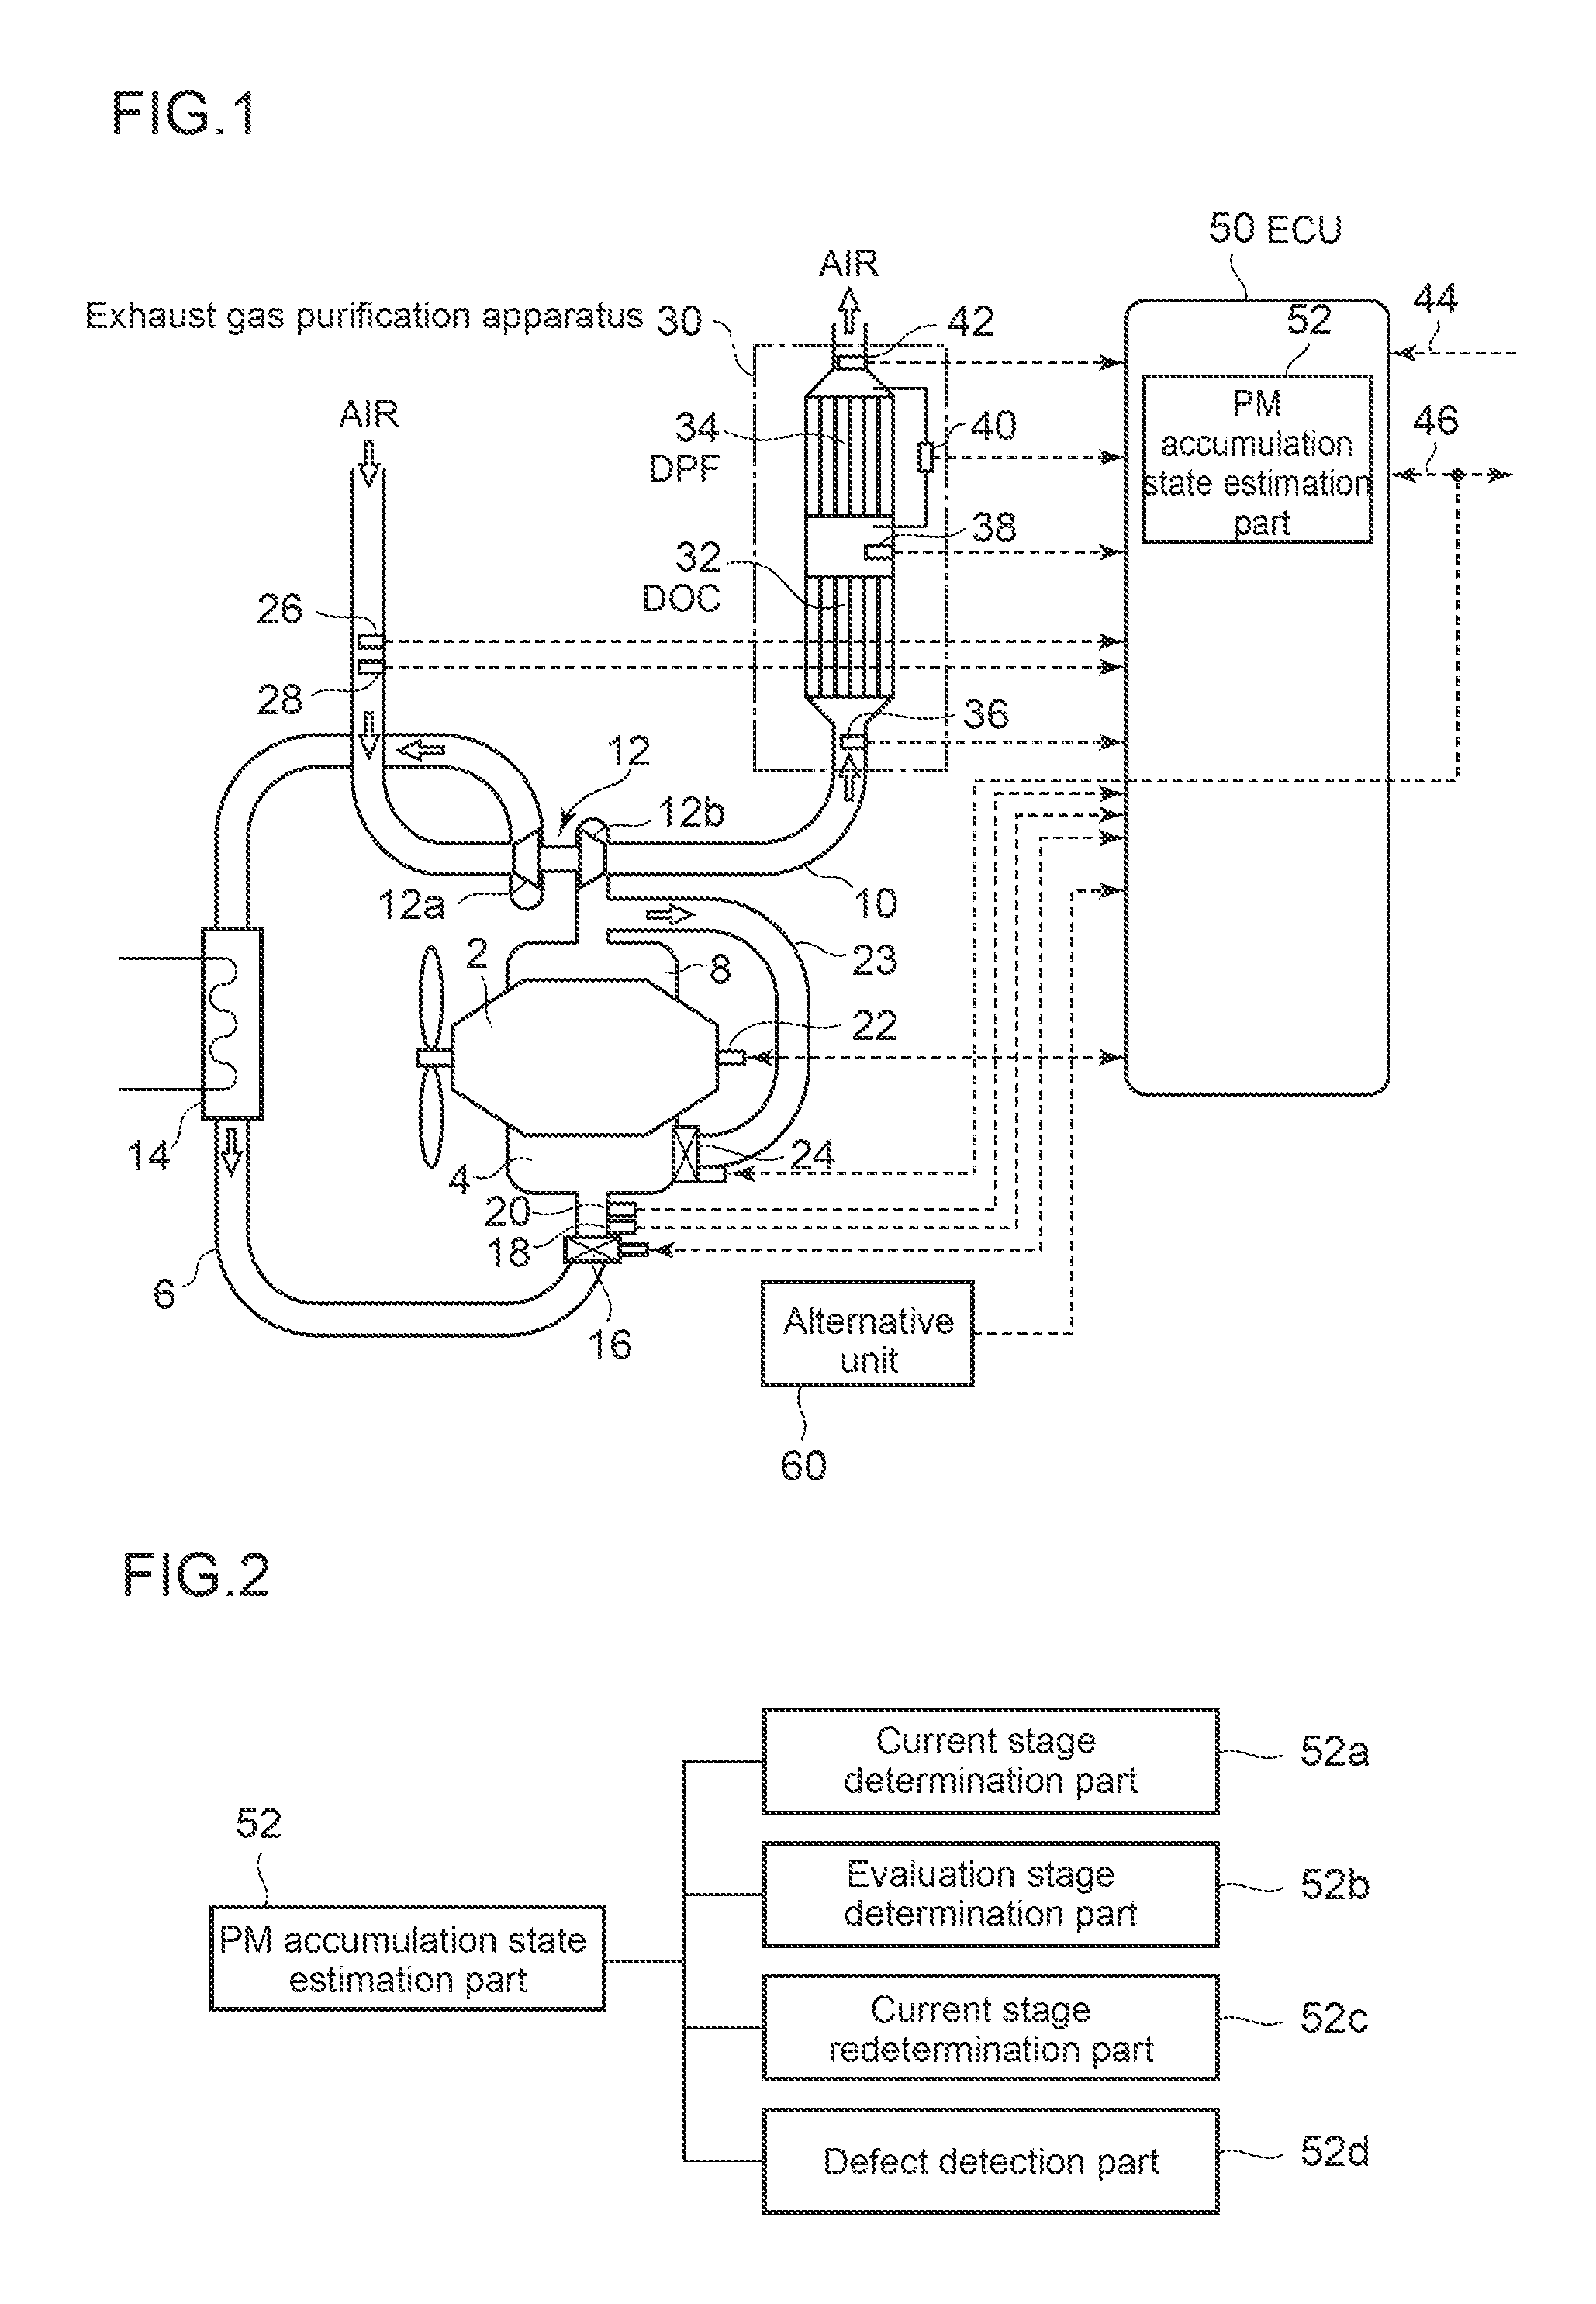 Exhaust gas purification system for engine